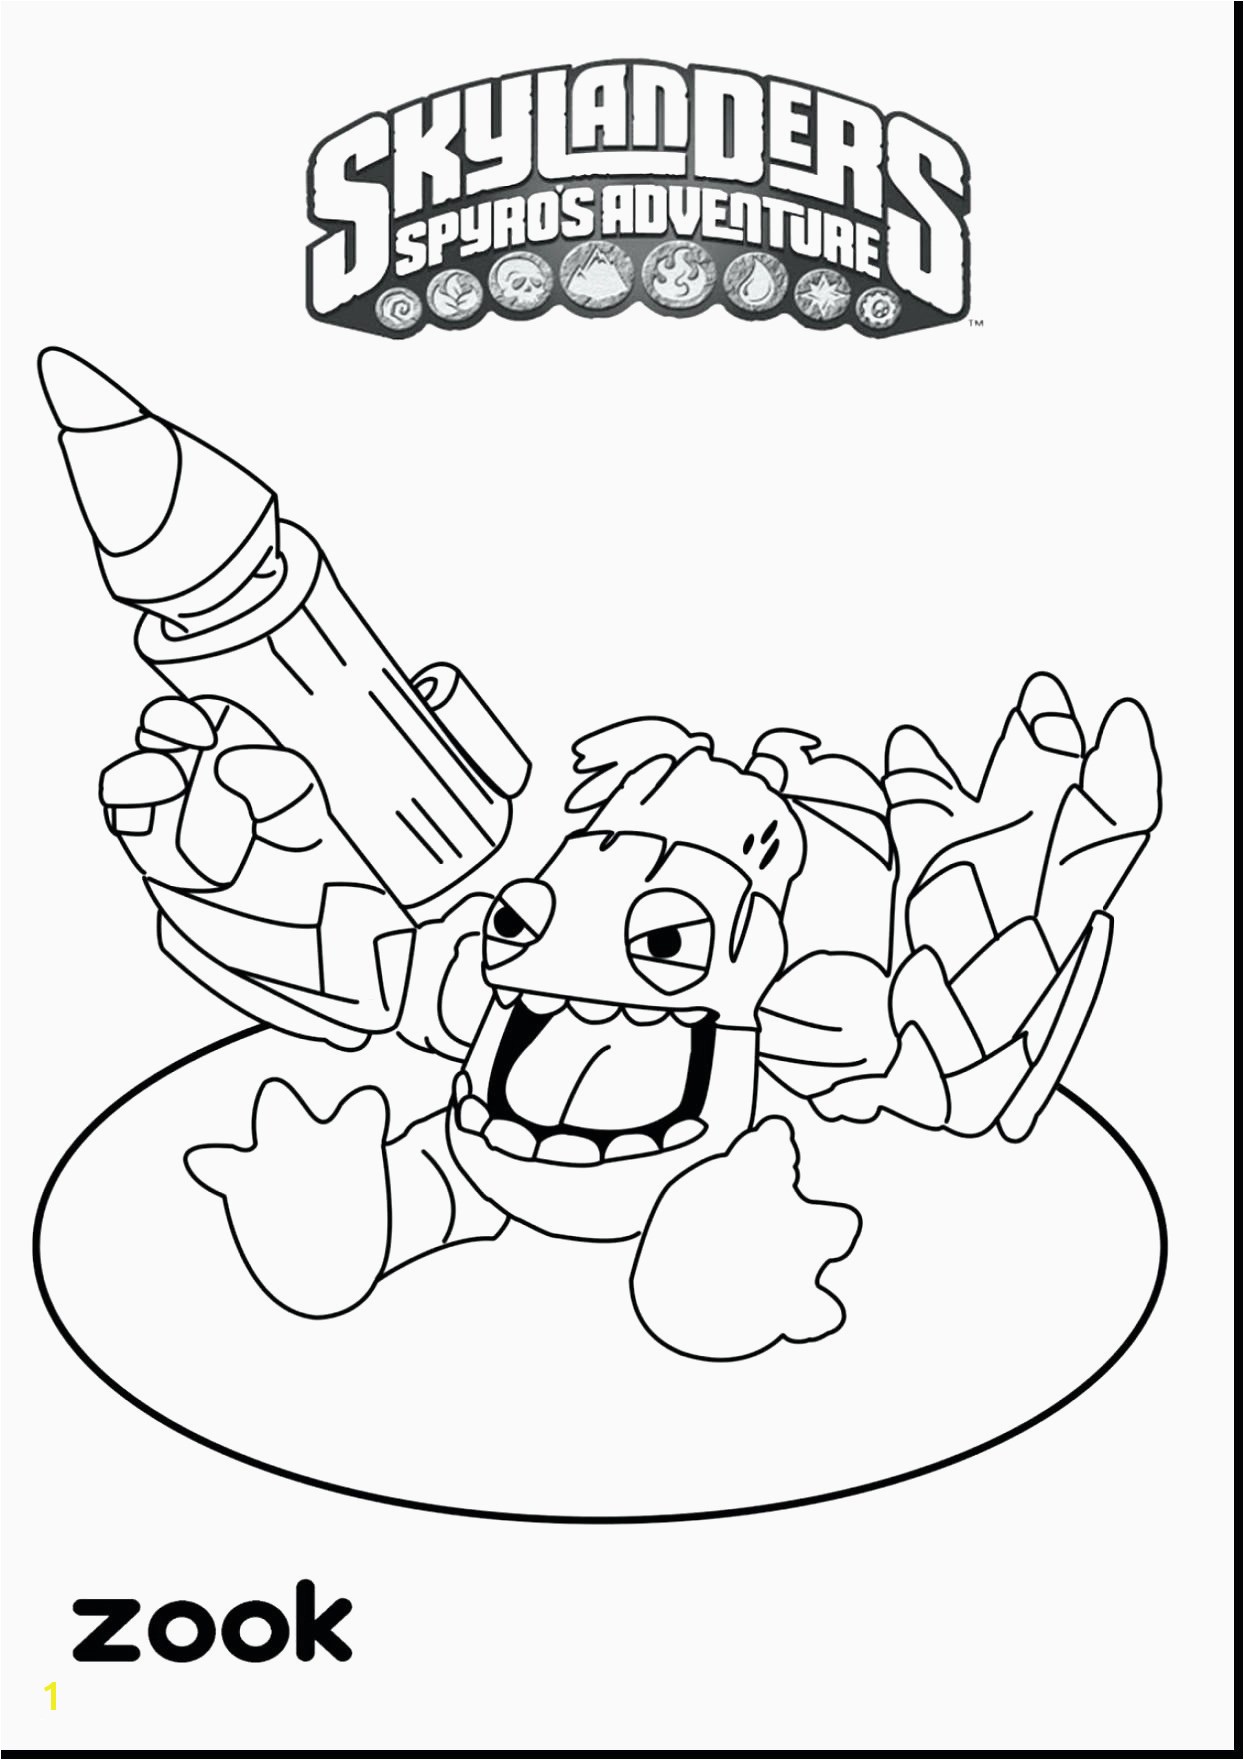 Print the Coloring Pages Color Pages to Print Coloring Pages for Kides Beautiful Coloring